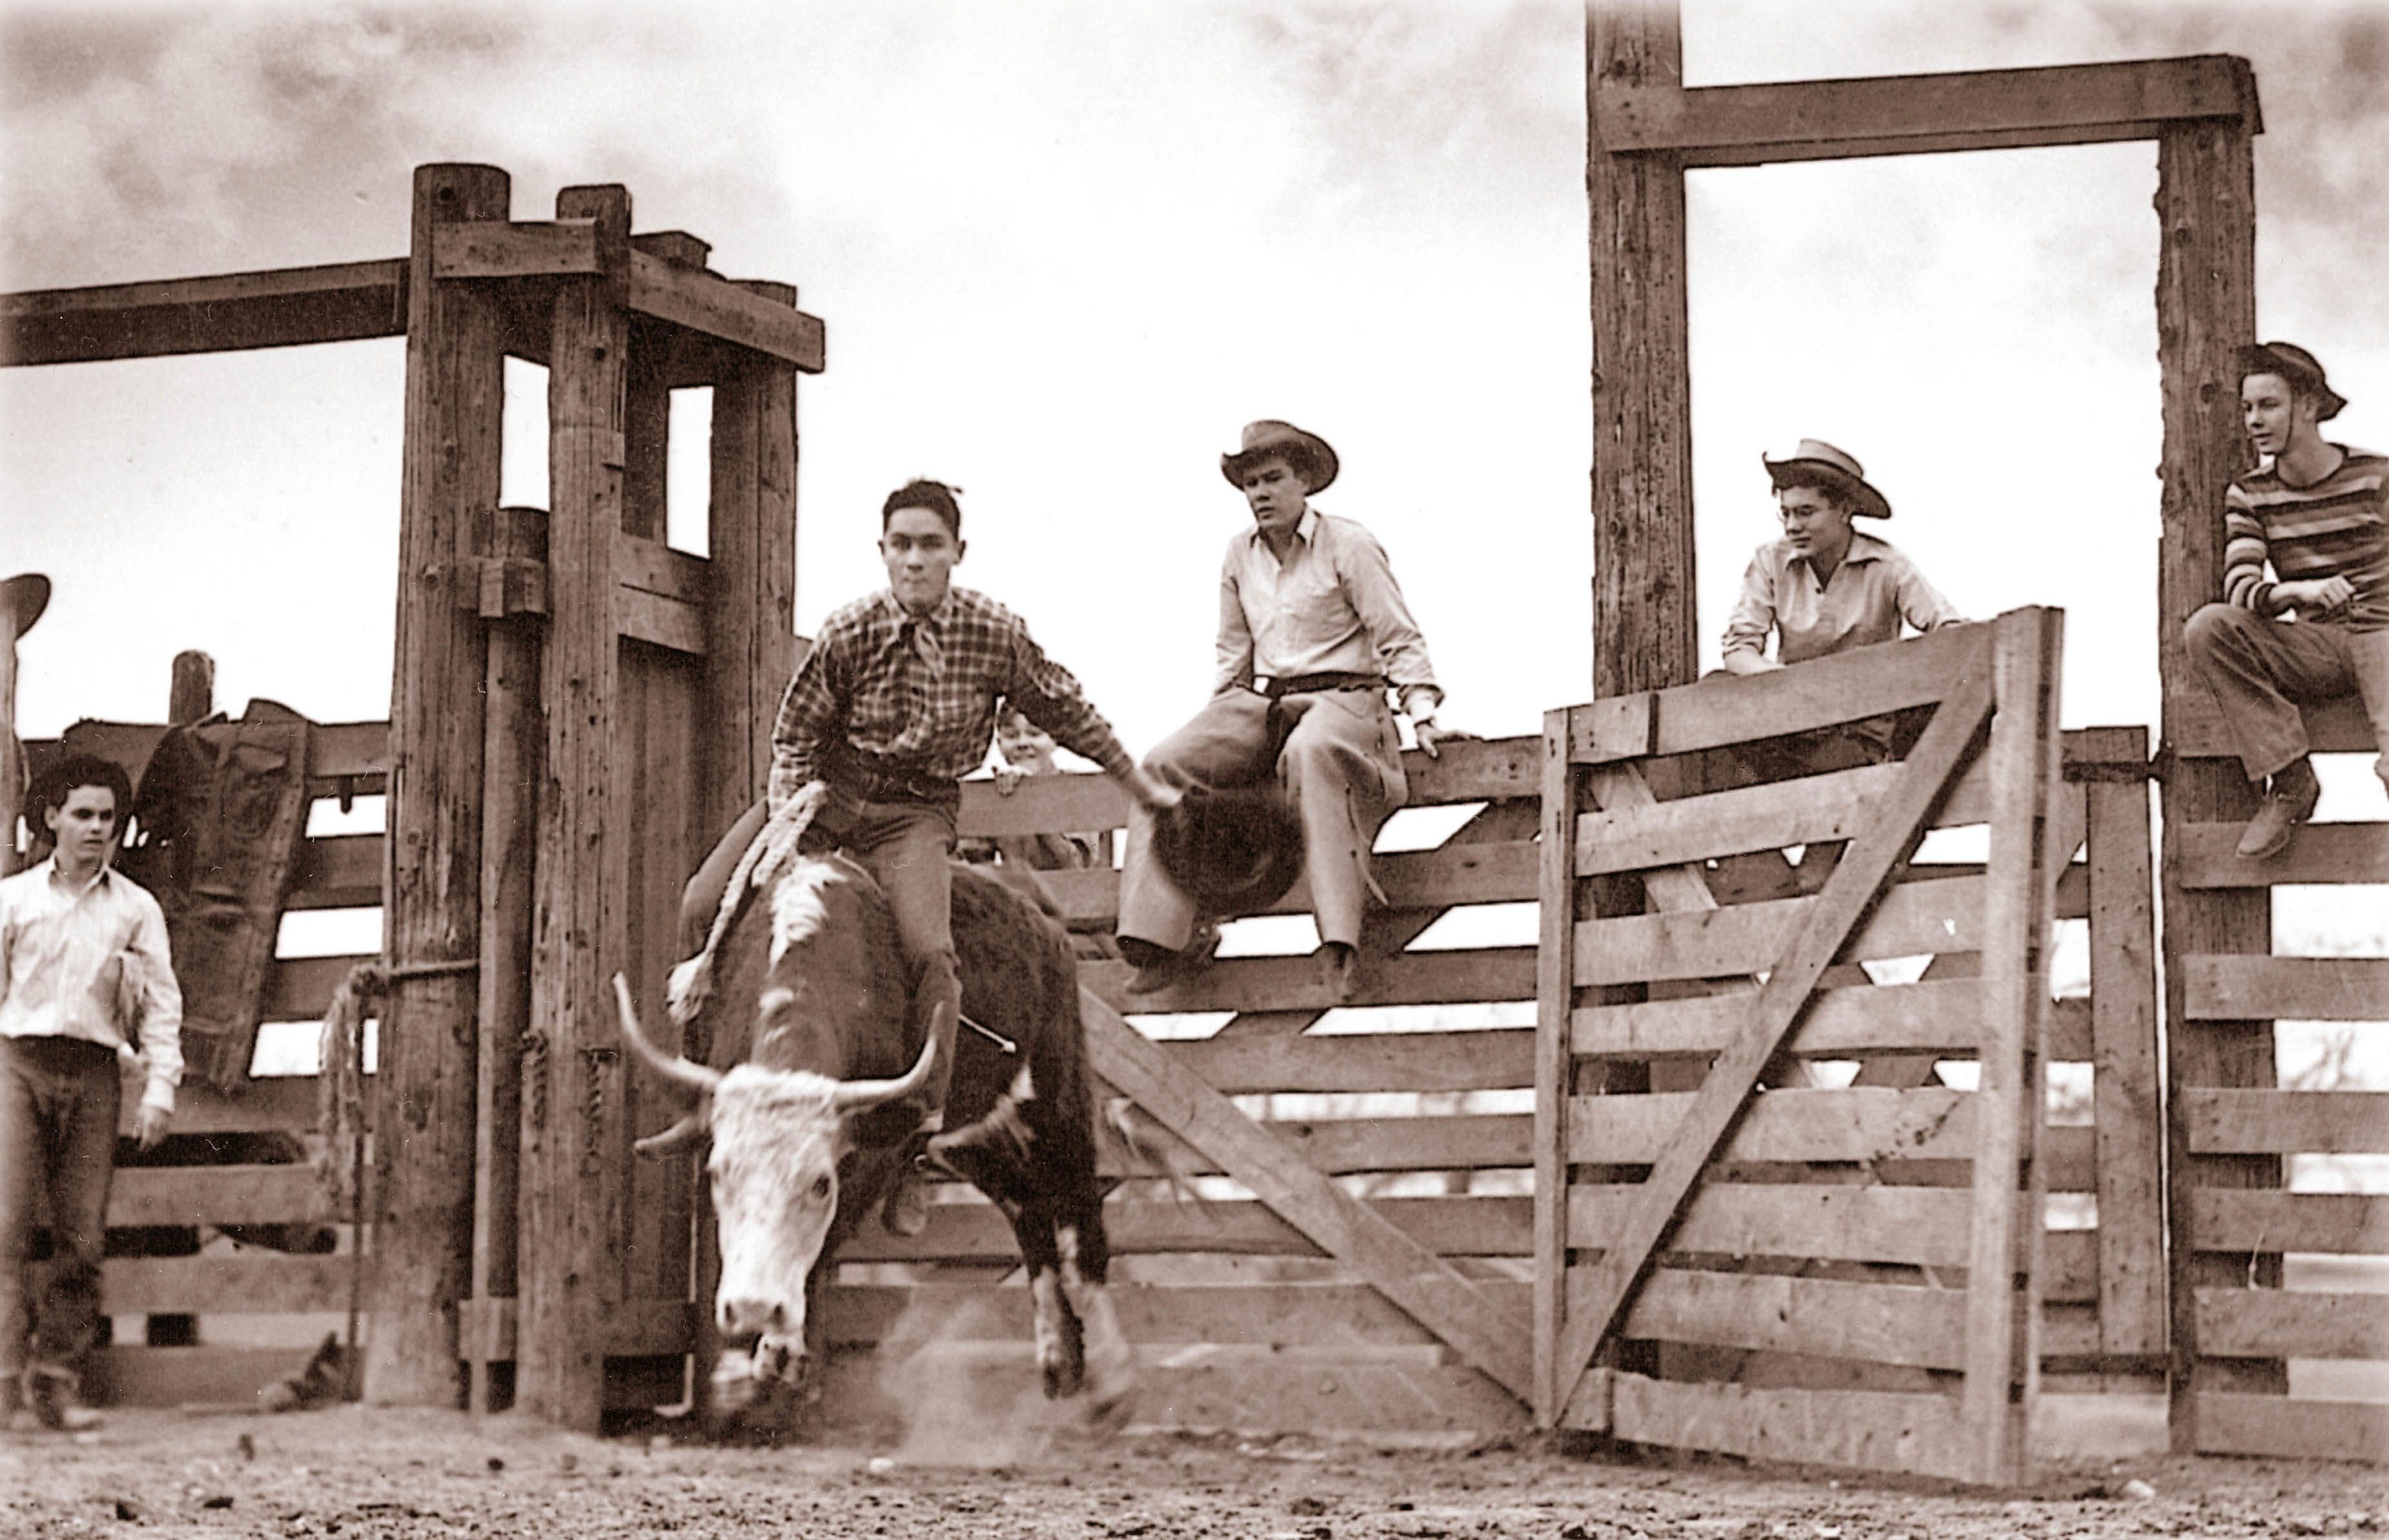 Teenaged Ben Carpenter and friends riding bulls on the ranch.